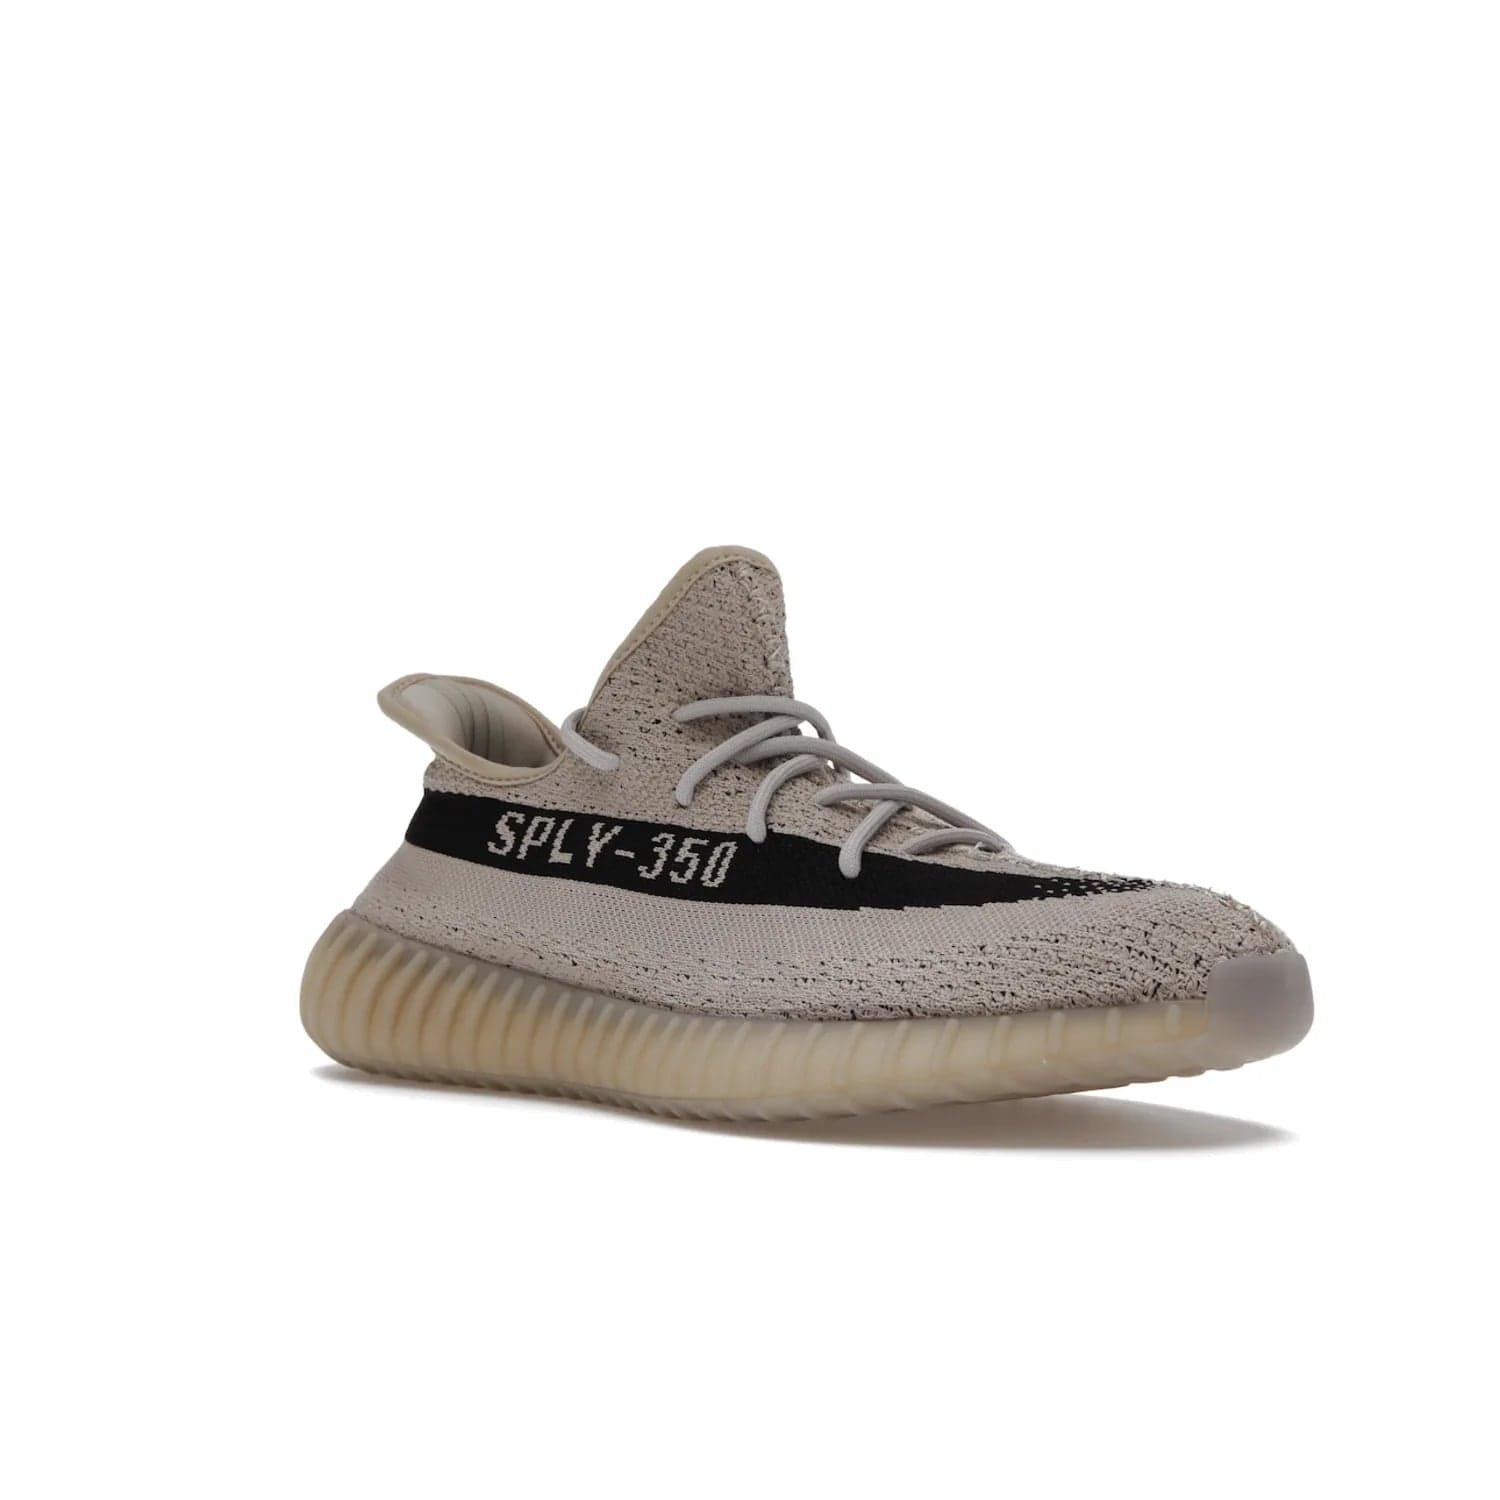 adidas Yeezy Boost 350 V2 Slate - Image 5 - Only at www.BallersClubKickz.com - Adidas Yeezy Boost 350 V2 Slate Core Black Slate featuring Primeknit upper, Boost midsole and semi-translucent TPU cage. Launched on 3/9/2022, retailed at $230.